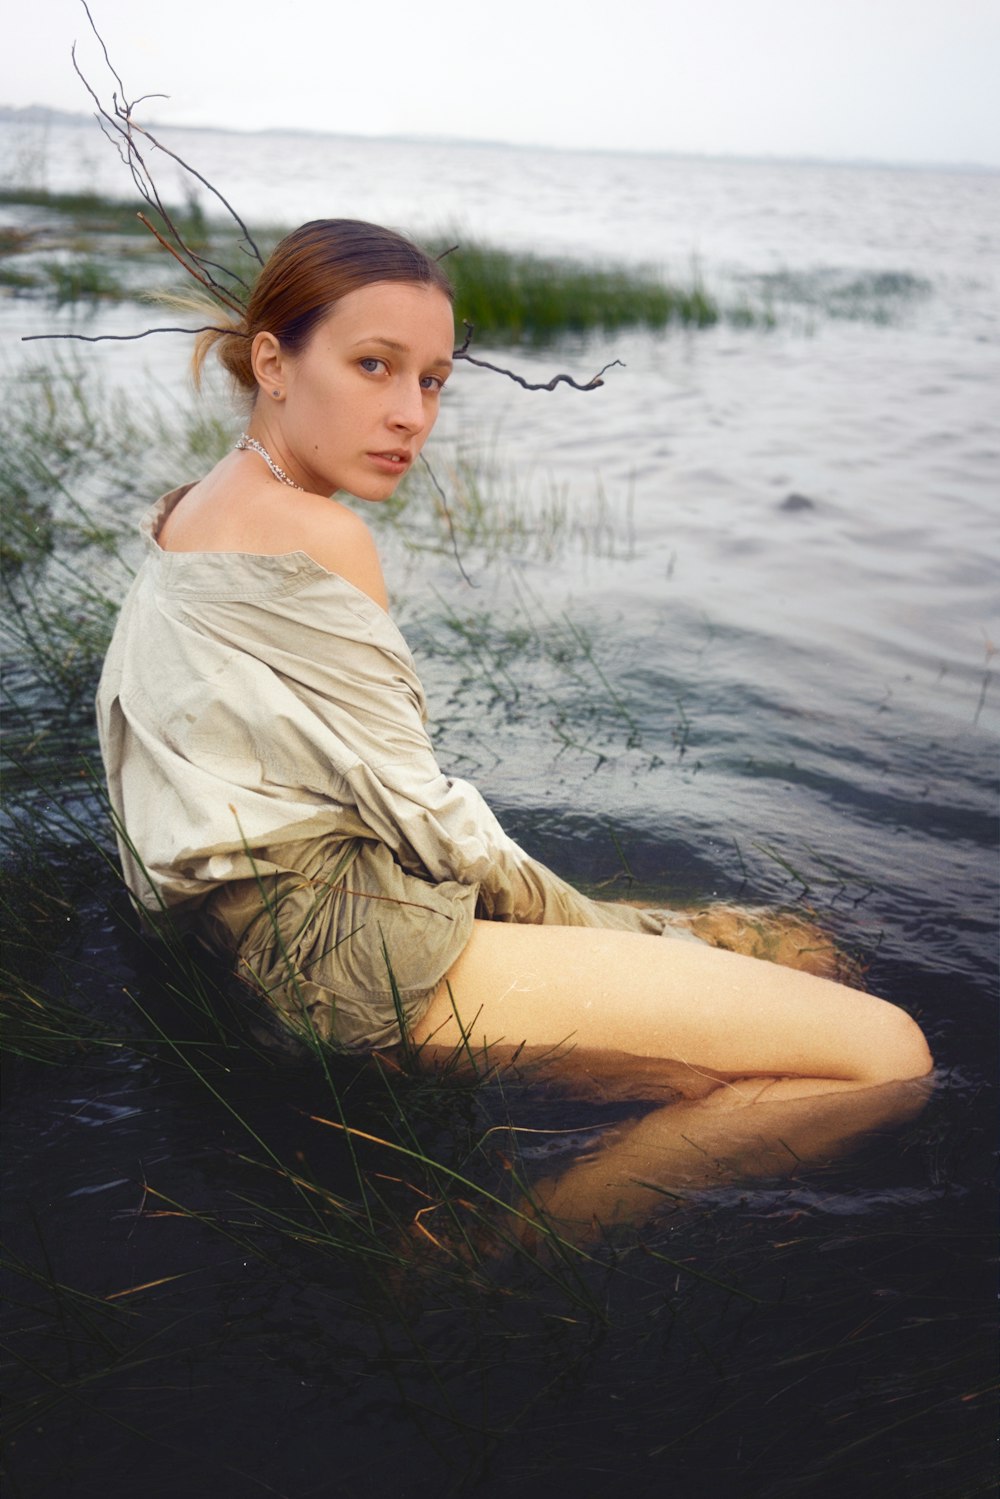 a woman sitting in a body of water